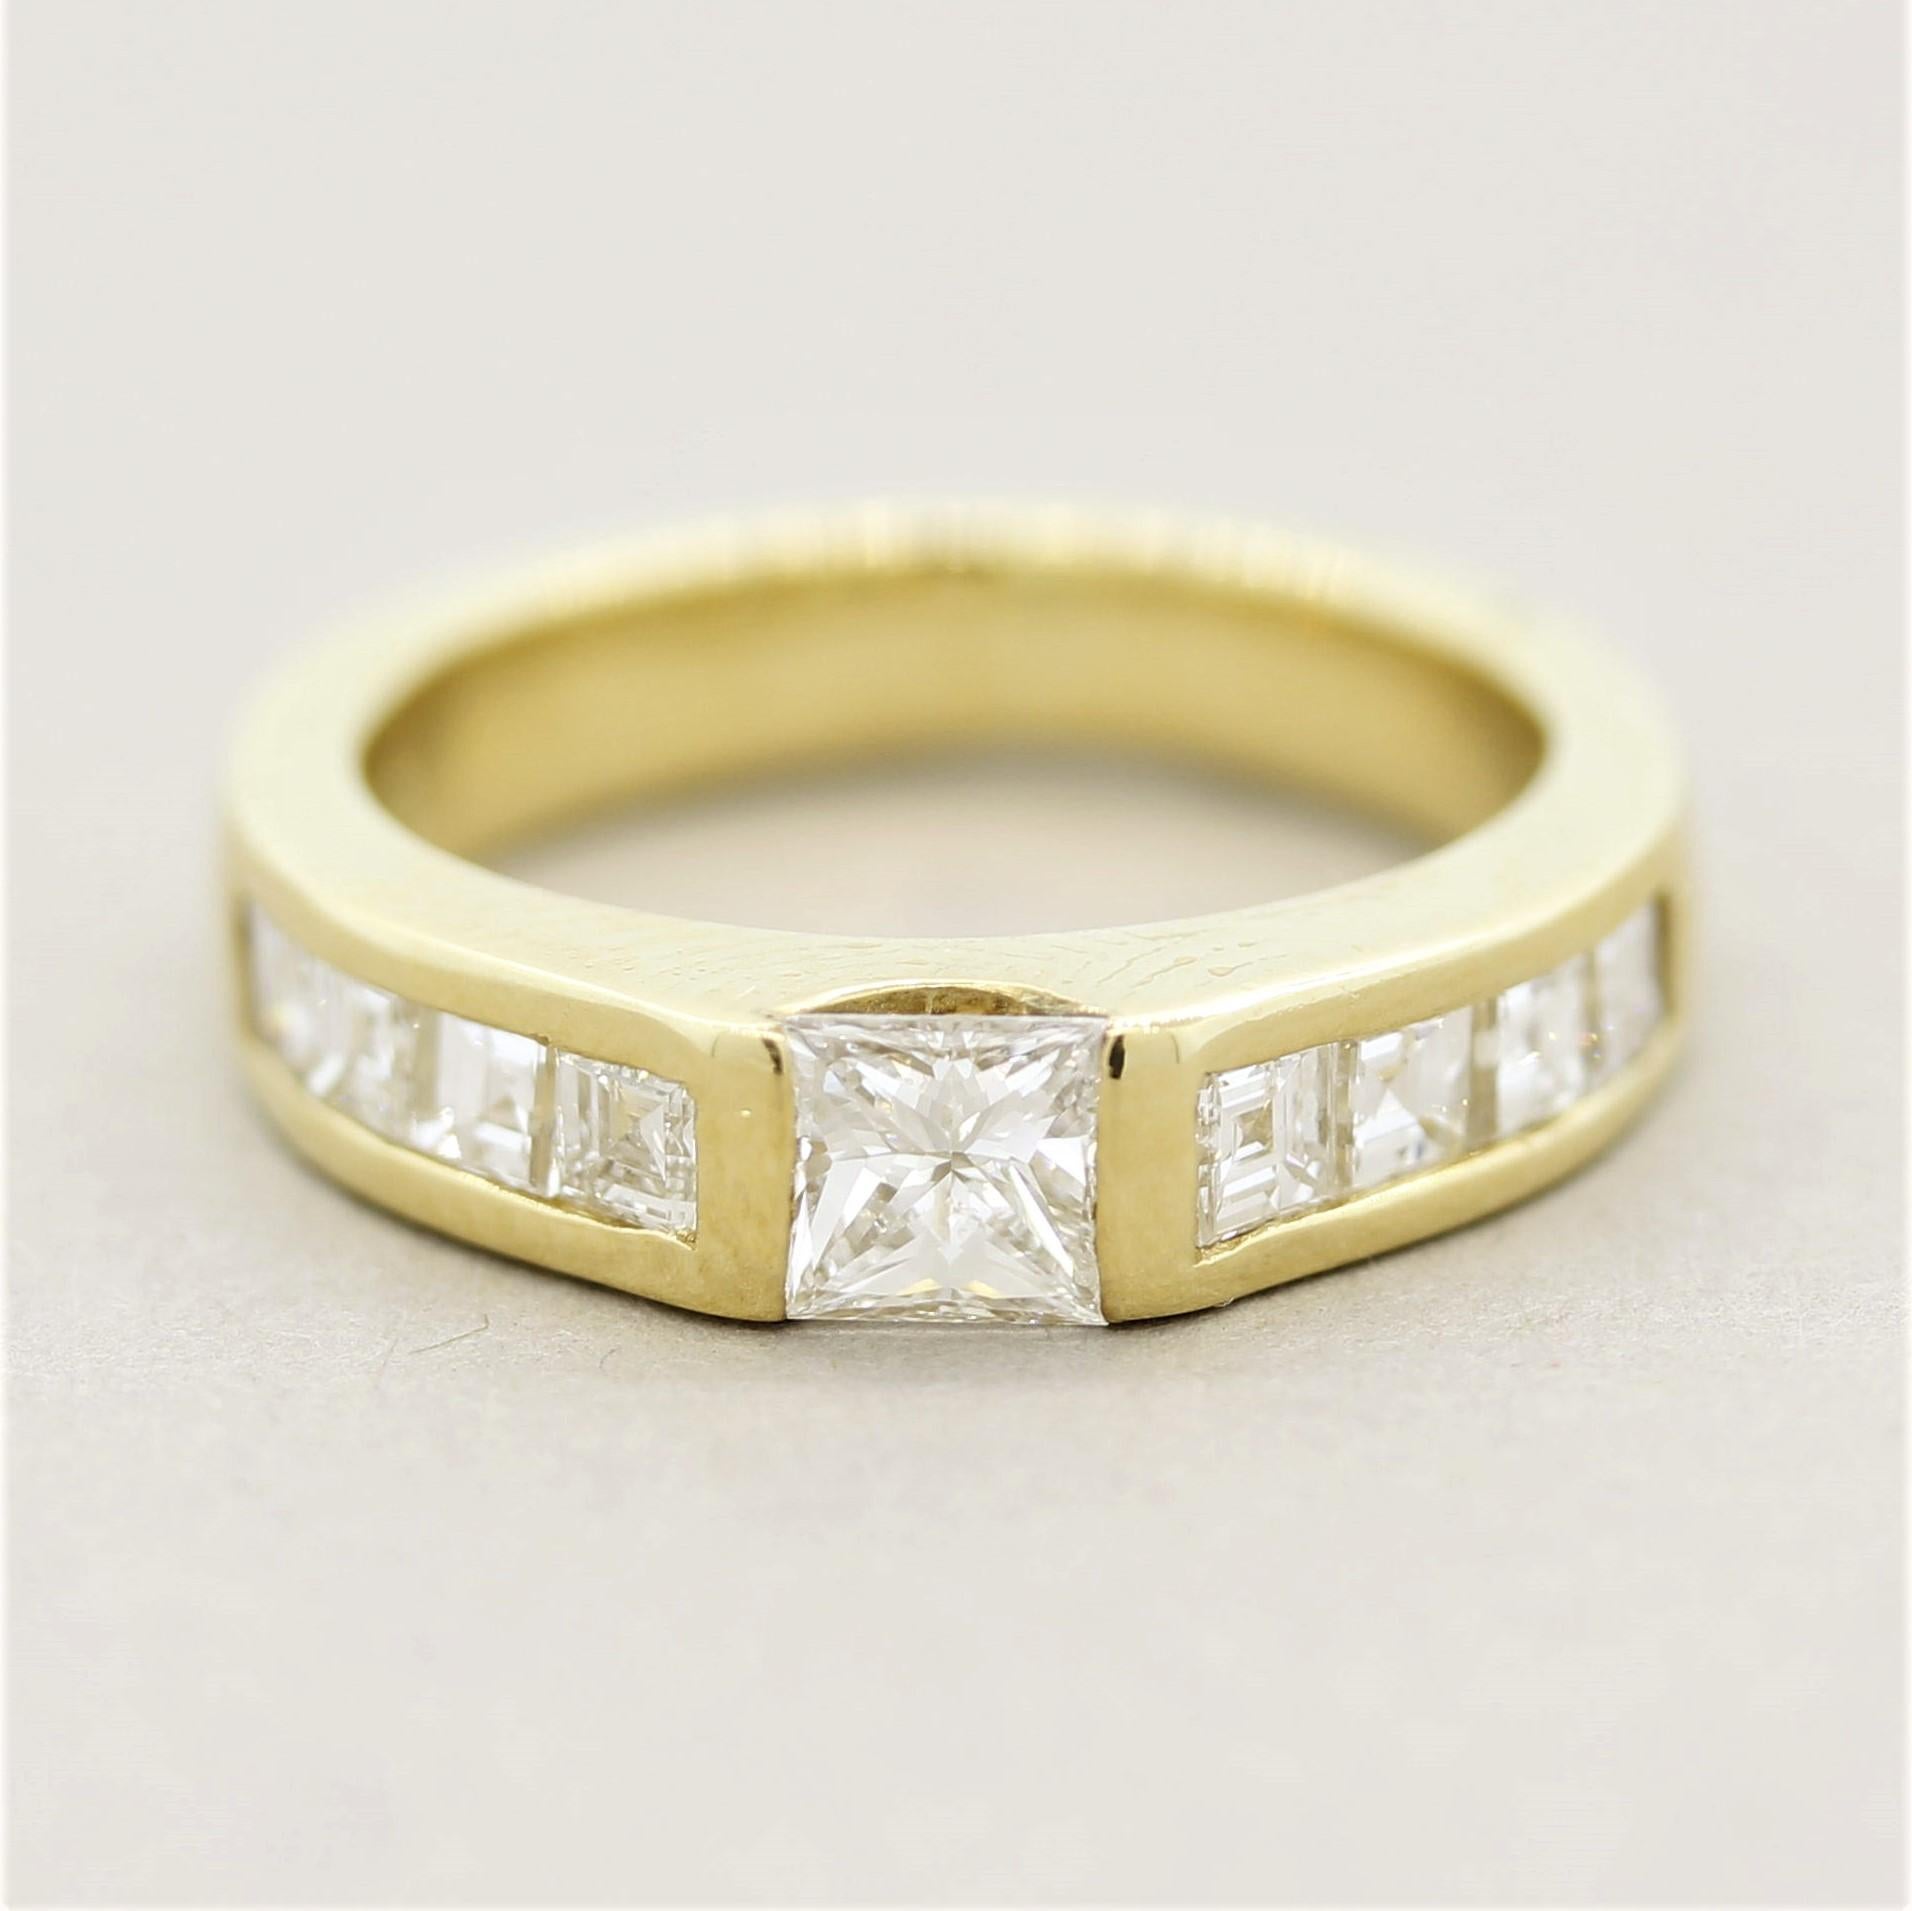 A simple yet stylish diamond band! It features a 0.62 carat princess-cut diamond in the center which is accented by 0.36 carats of square-shape diamonds. They are channel-set and run down the sides of the ring. Made in 18k yellow gold, a fine